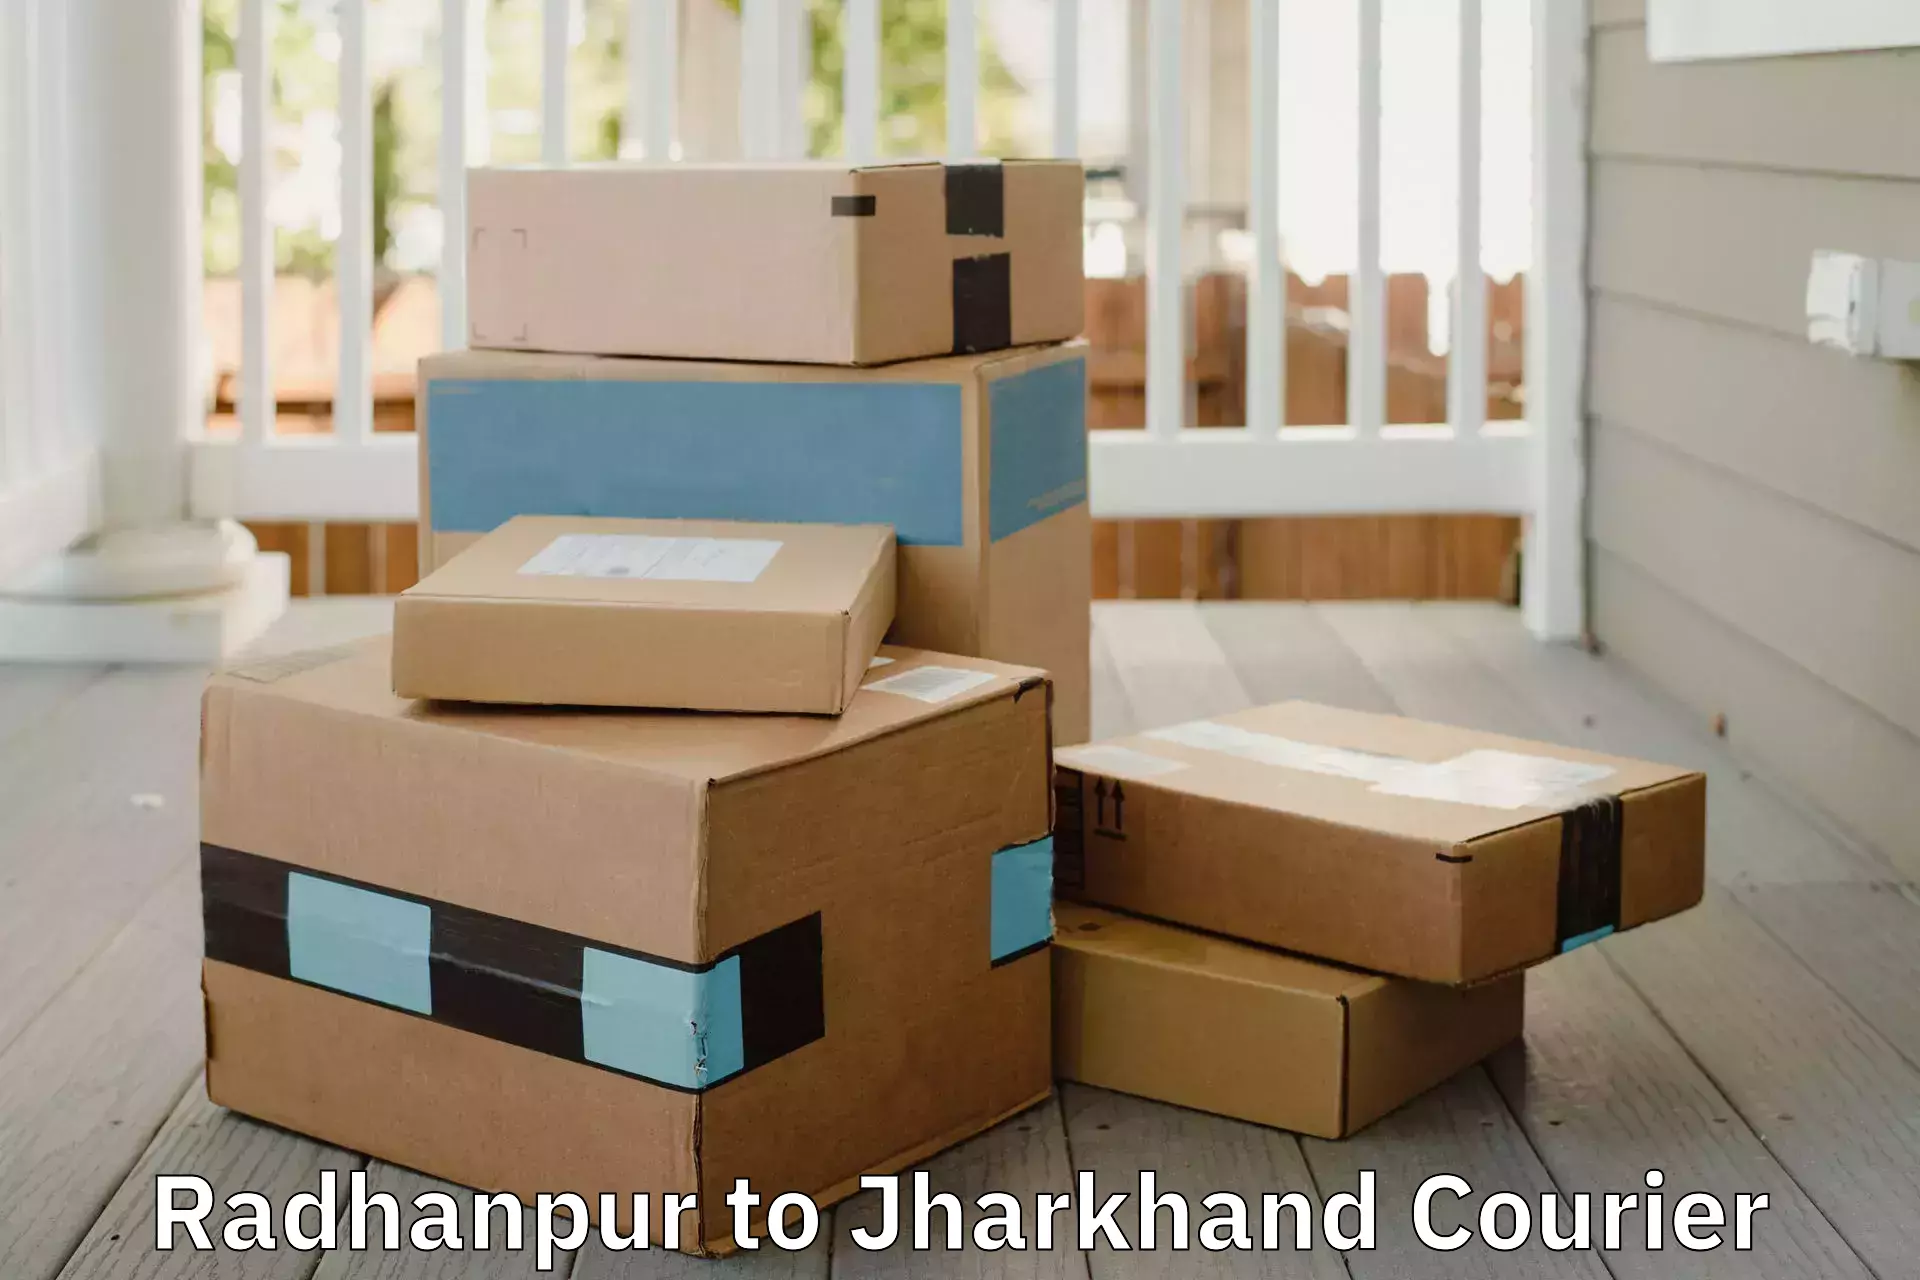 Furniture delivery service Radhanpur to Godabar Chatra